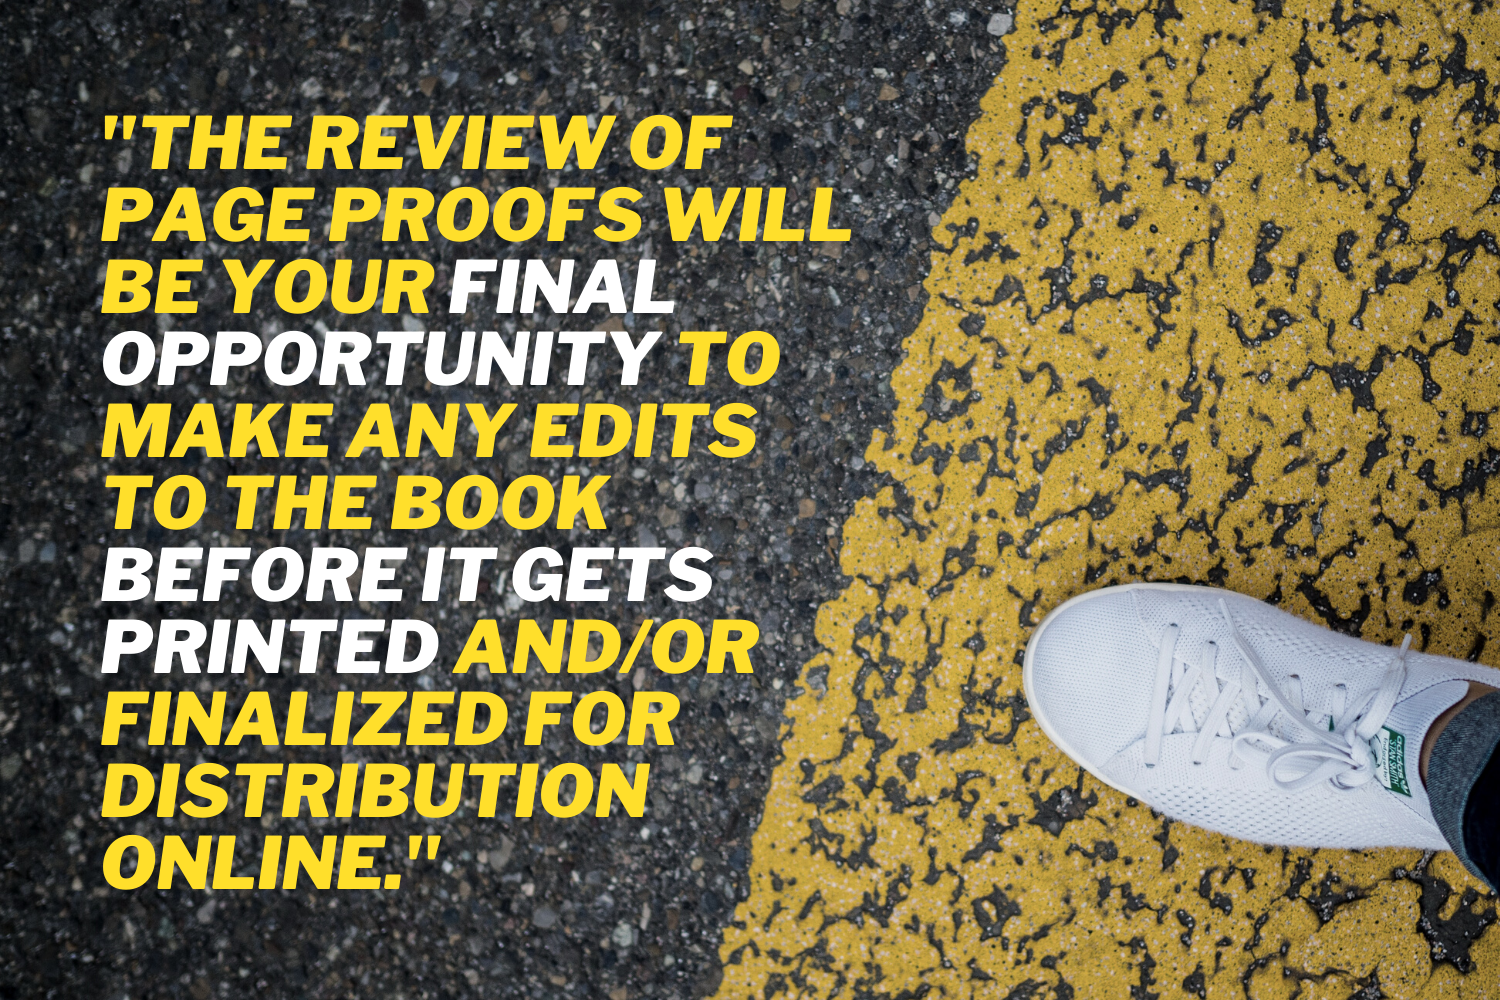 "The review of page proofs will be your final opportunity to make any edits to the book before it gets printed and/or finalized for distribution online."